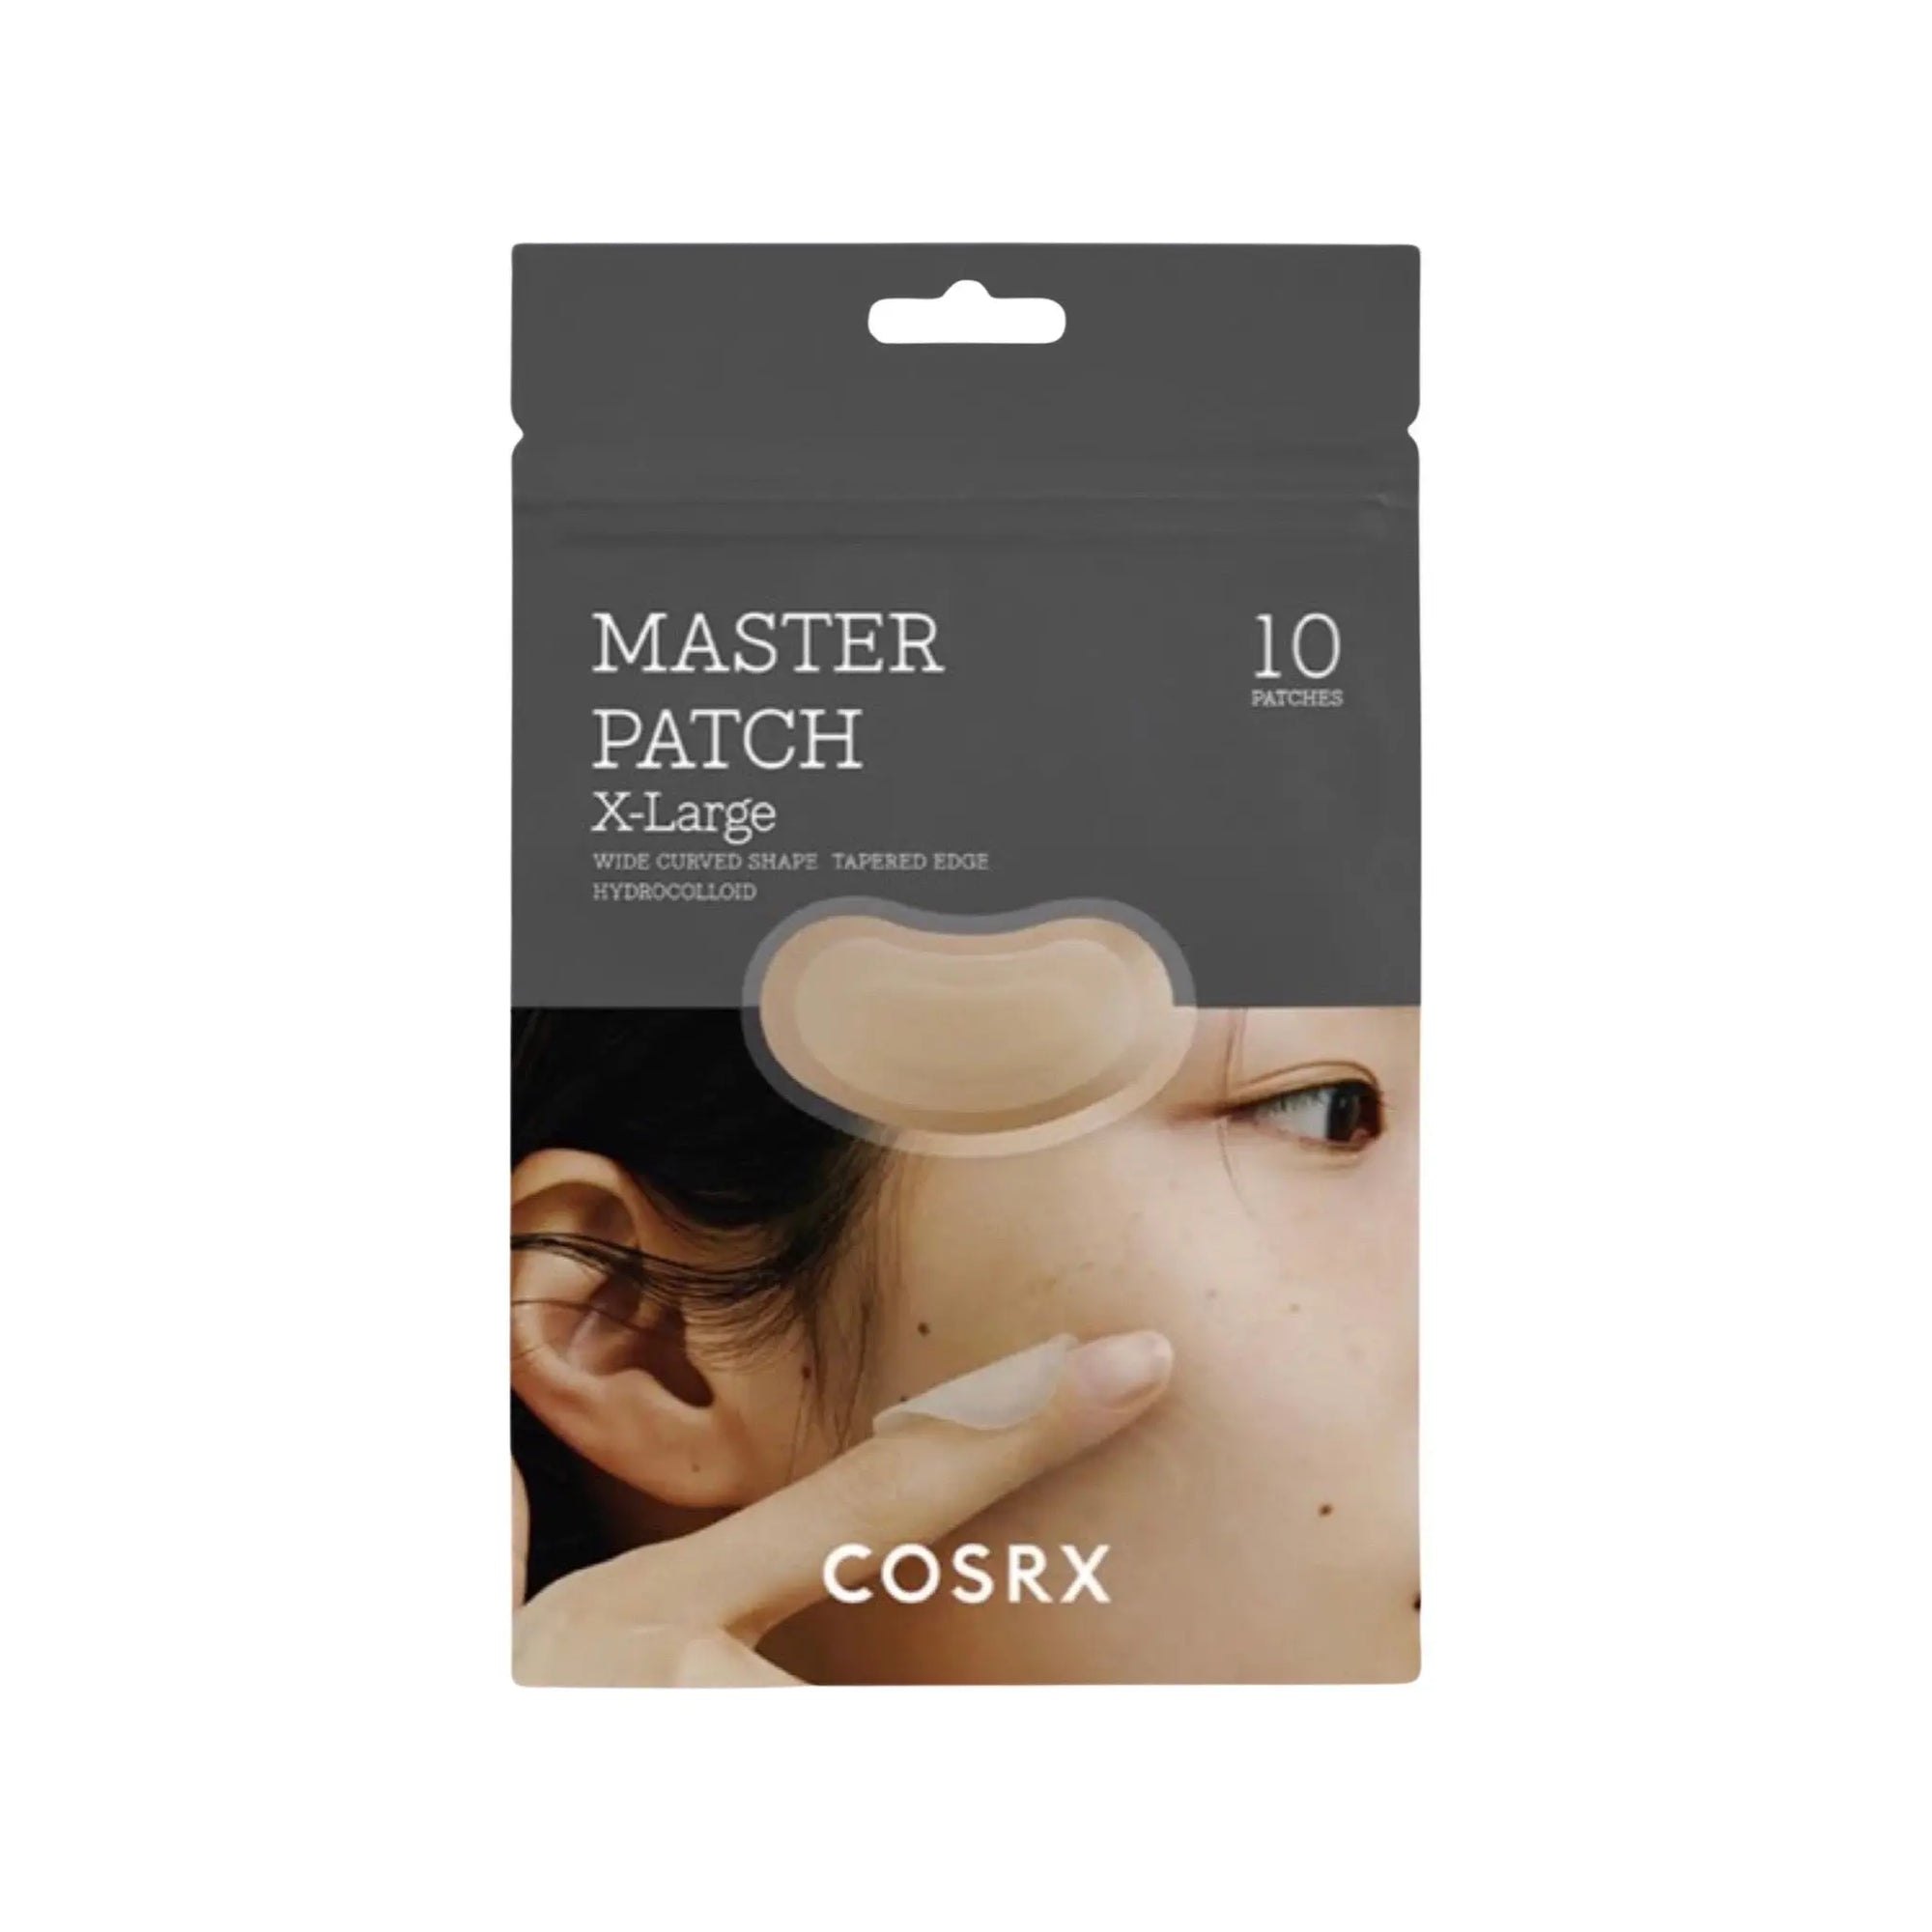 COSRX - Master Patch X-Large (10 patches) WanderShop